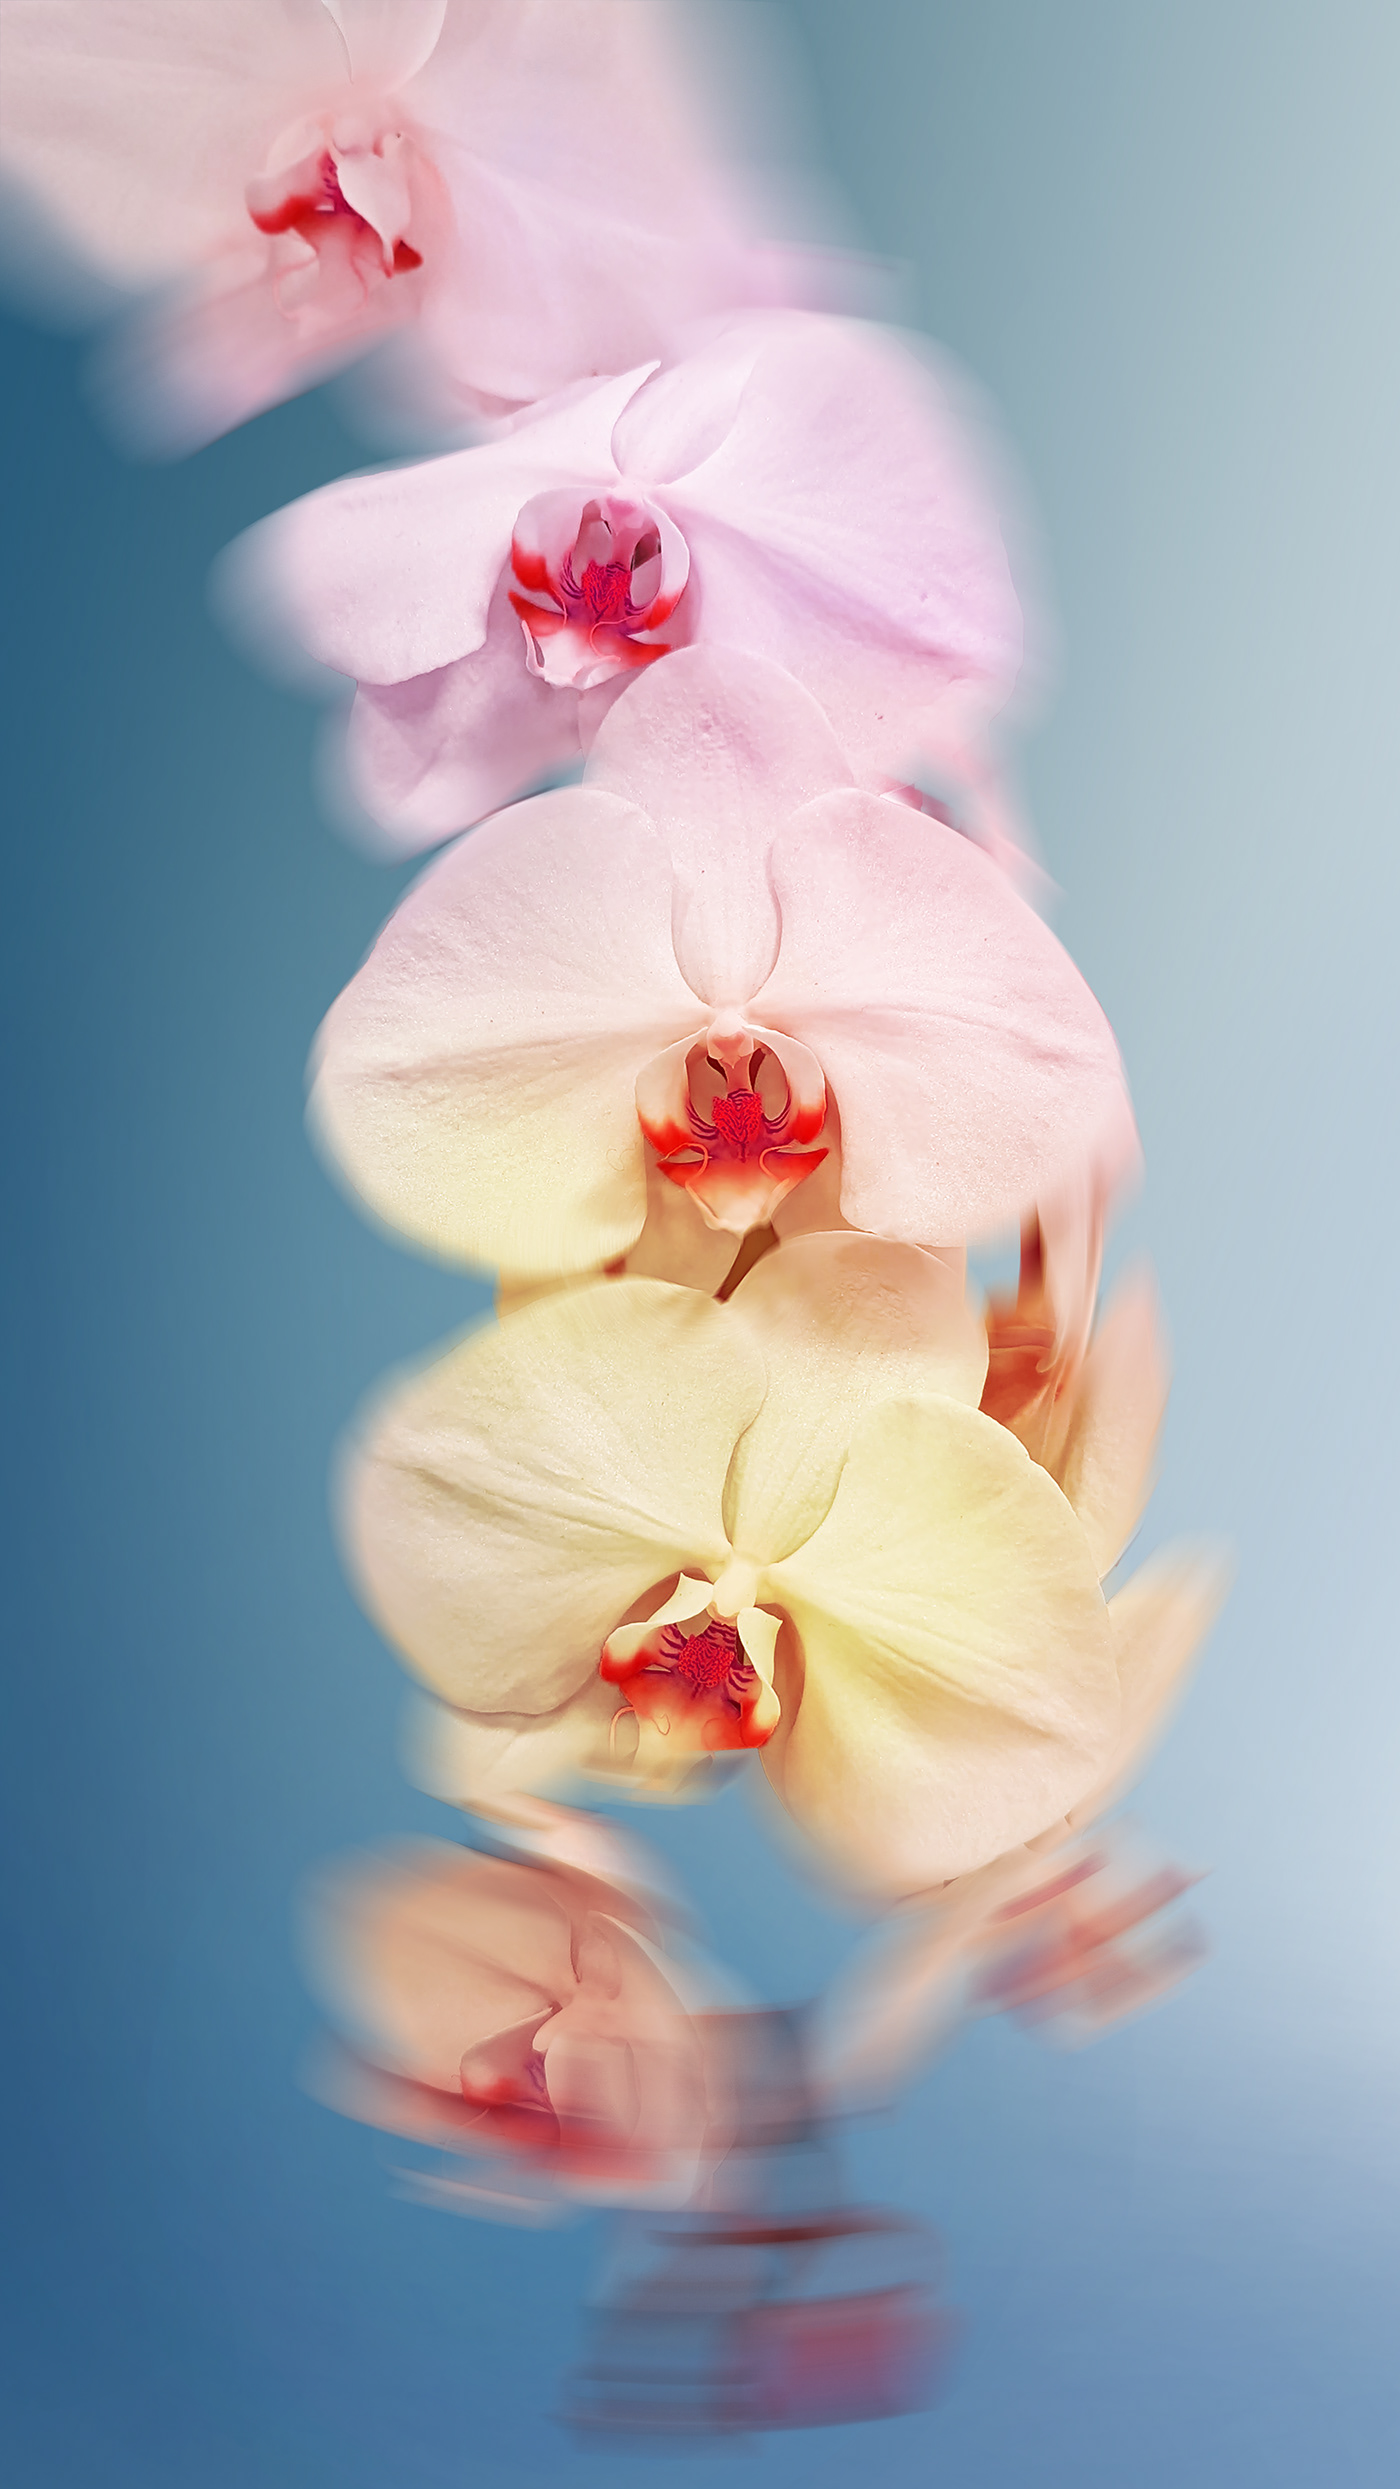 flower floral blossom shelby hanlon Photography  Nature nature photography photographer photoshop orchid